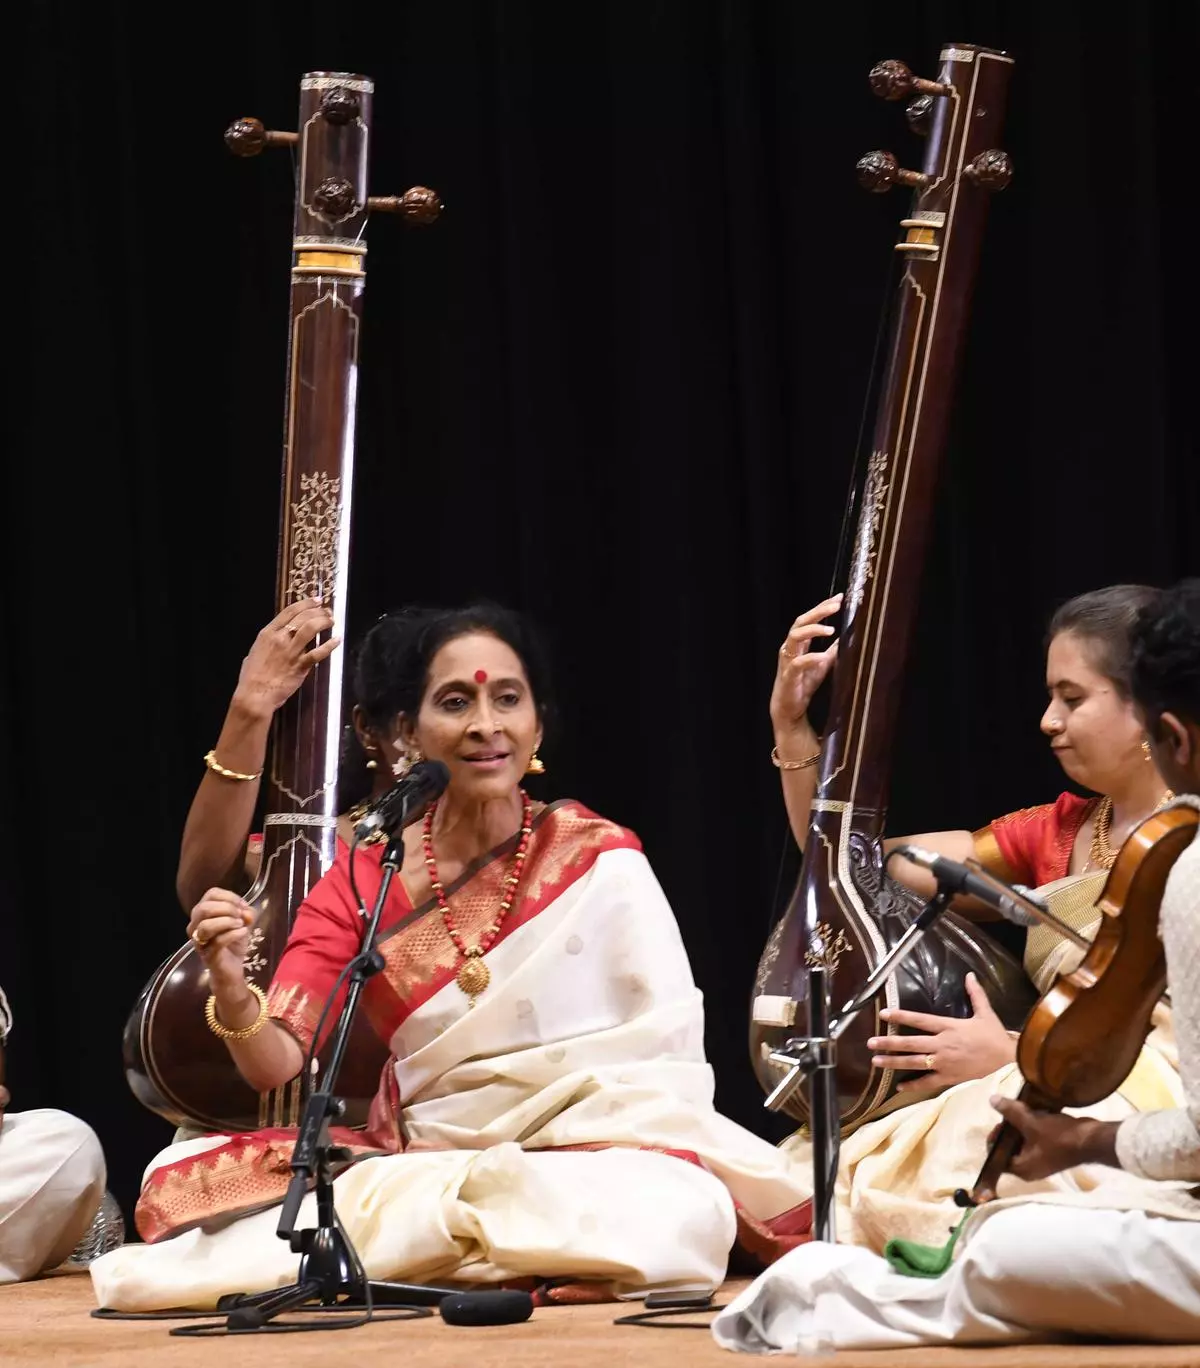 Besides Carnatic music, Jayashri is also trained on the veena, classical dance and Hindustani music